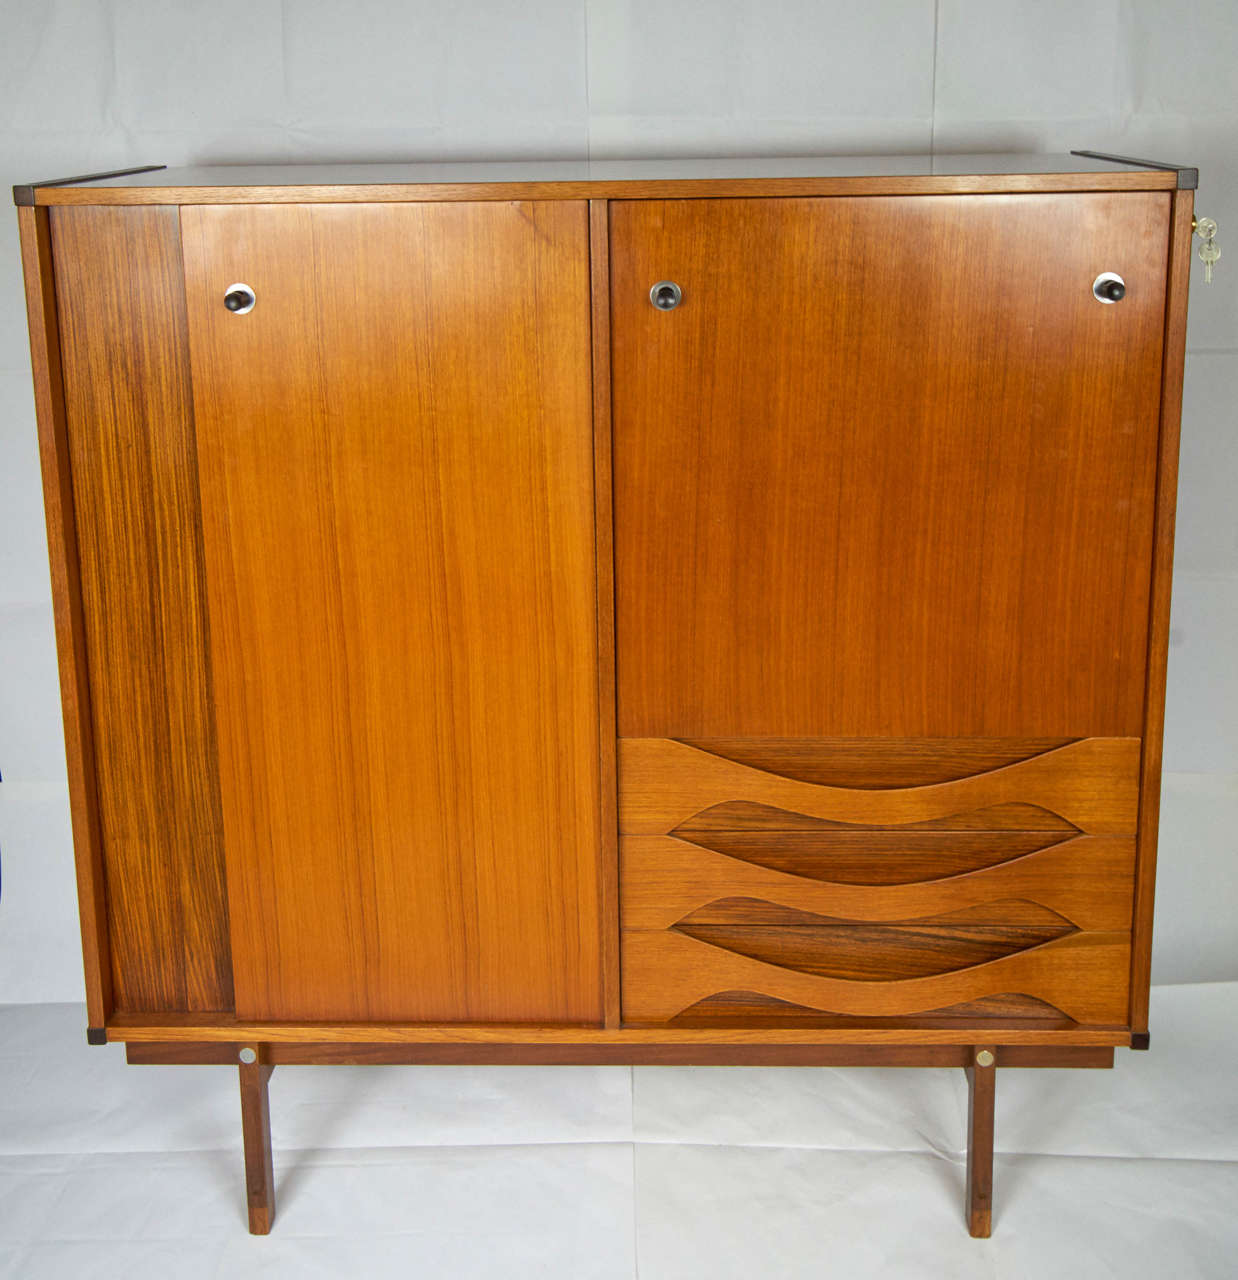 Teak and exotic wood cabinet, tree drawer and two doors with shelves inside.
Mid century Italy 1950's